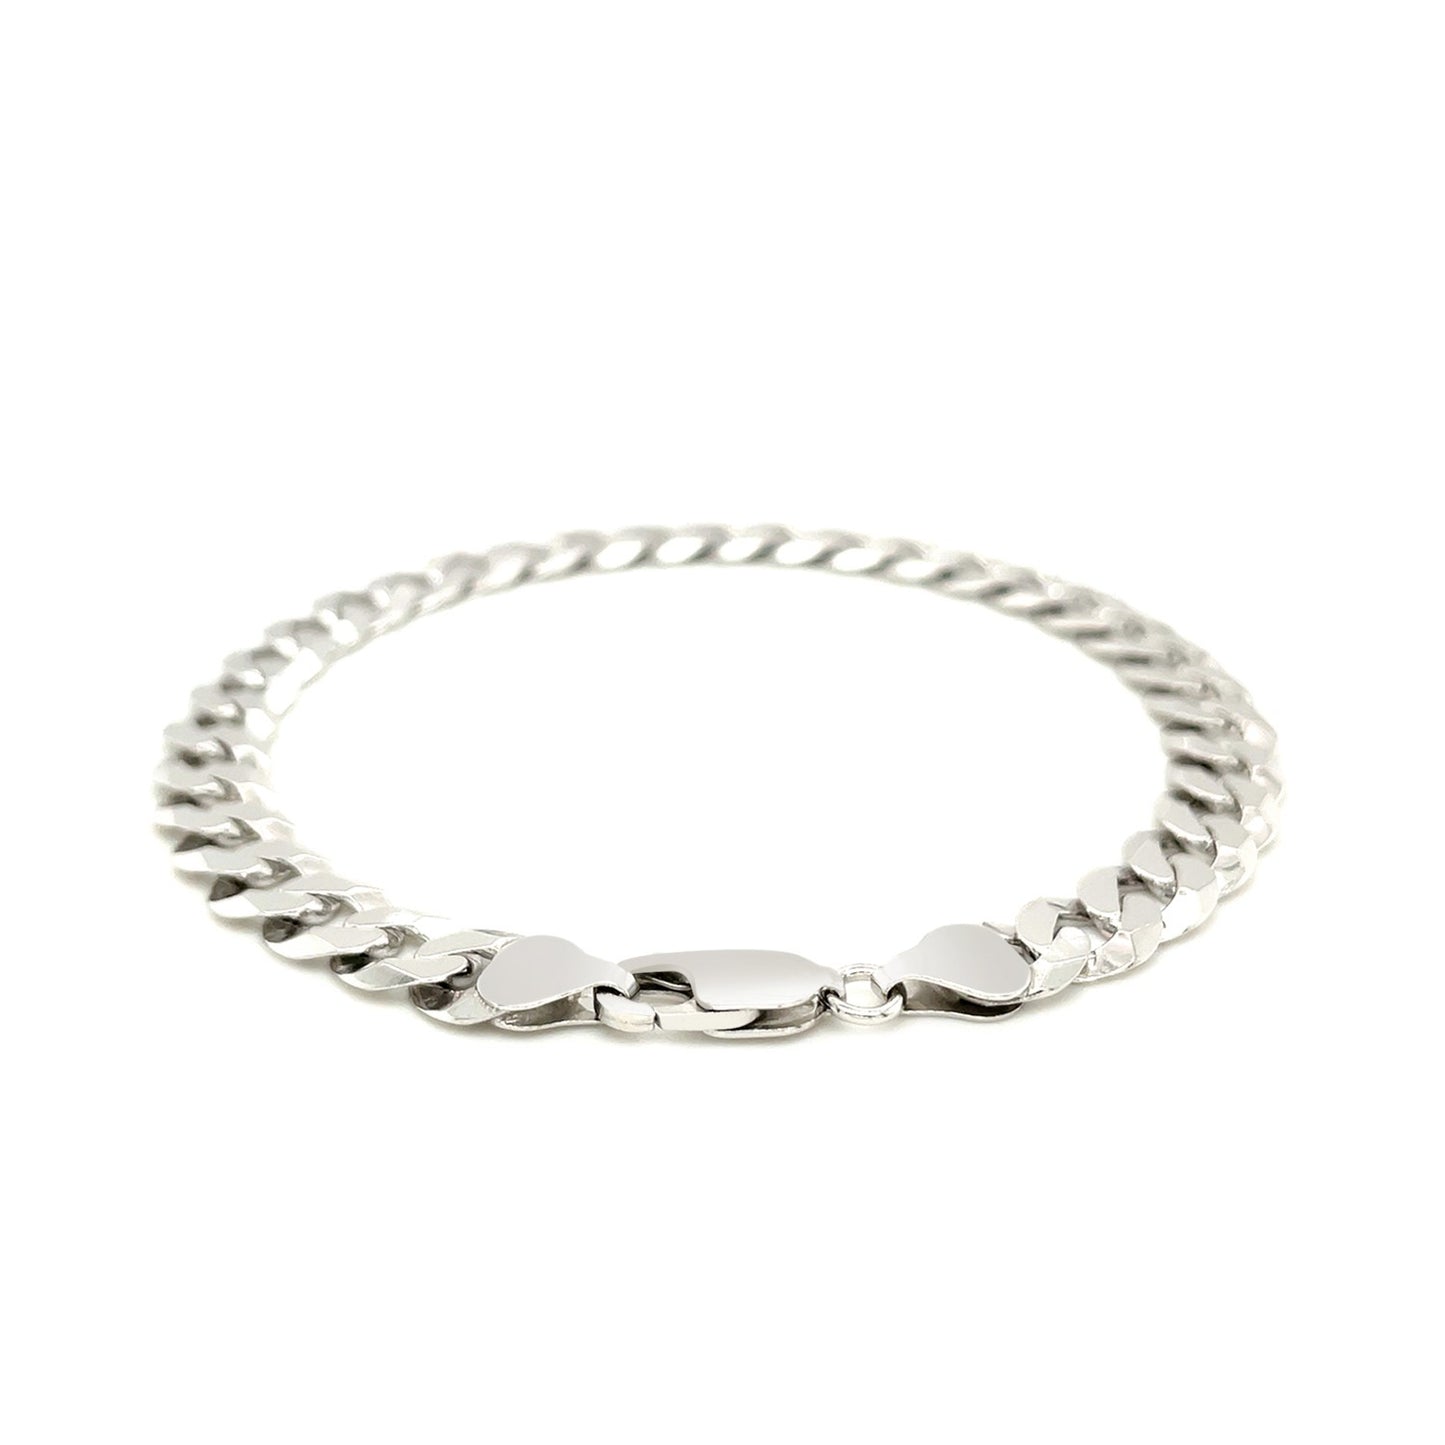 Rhodium Plated 7.9mm Sterling Silver Curb Style Bracelet